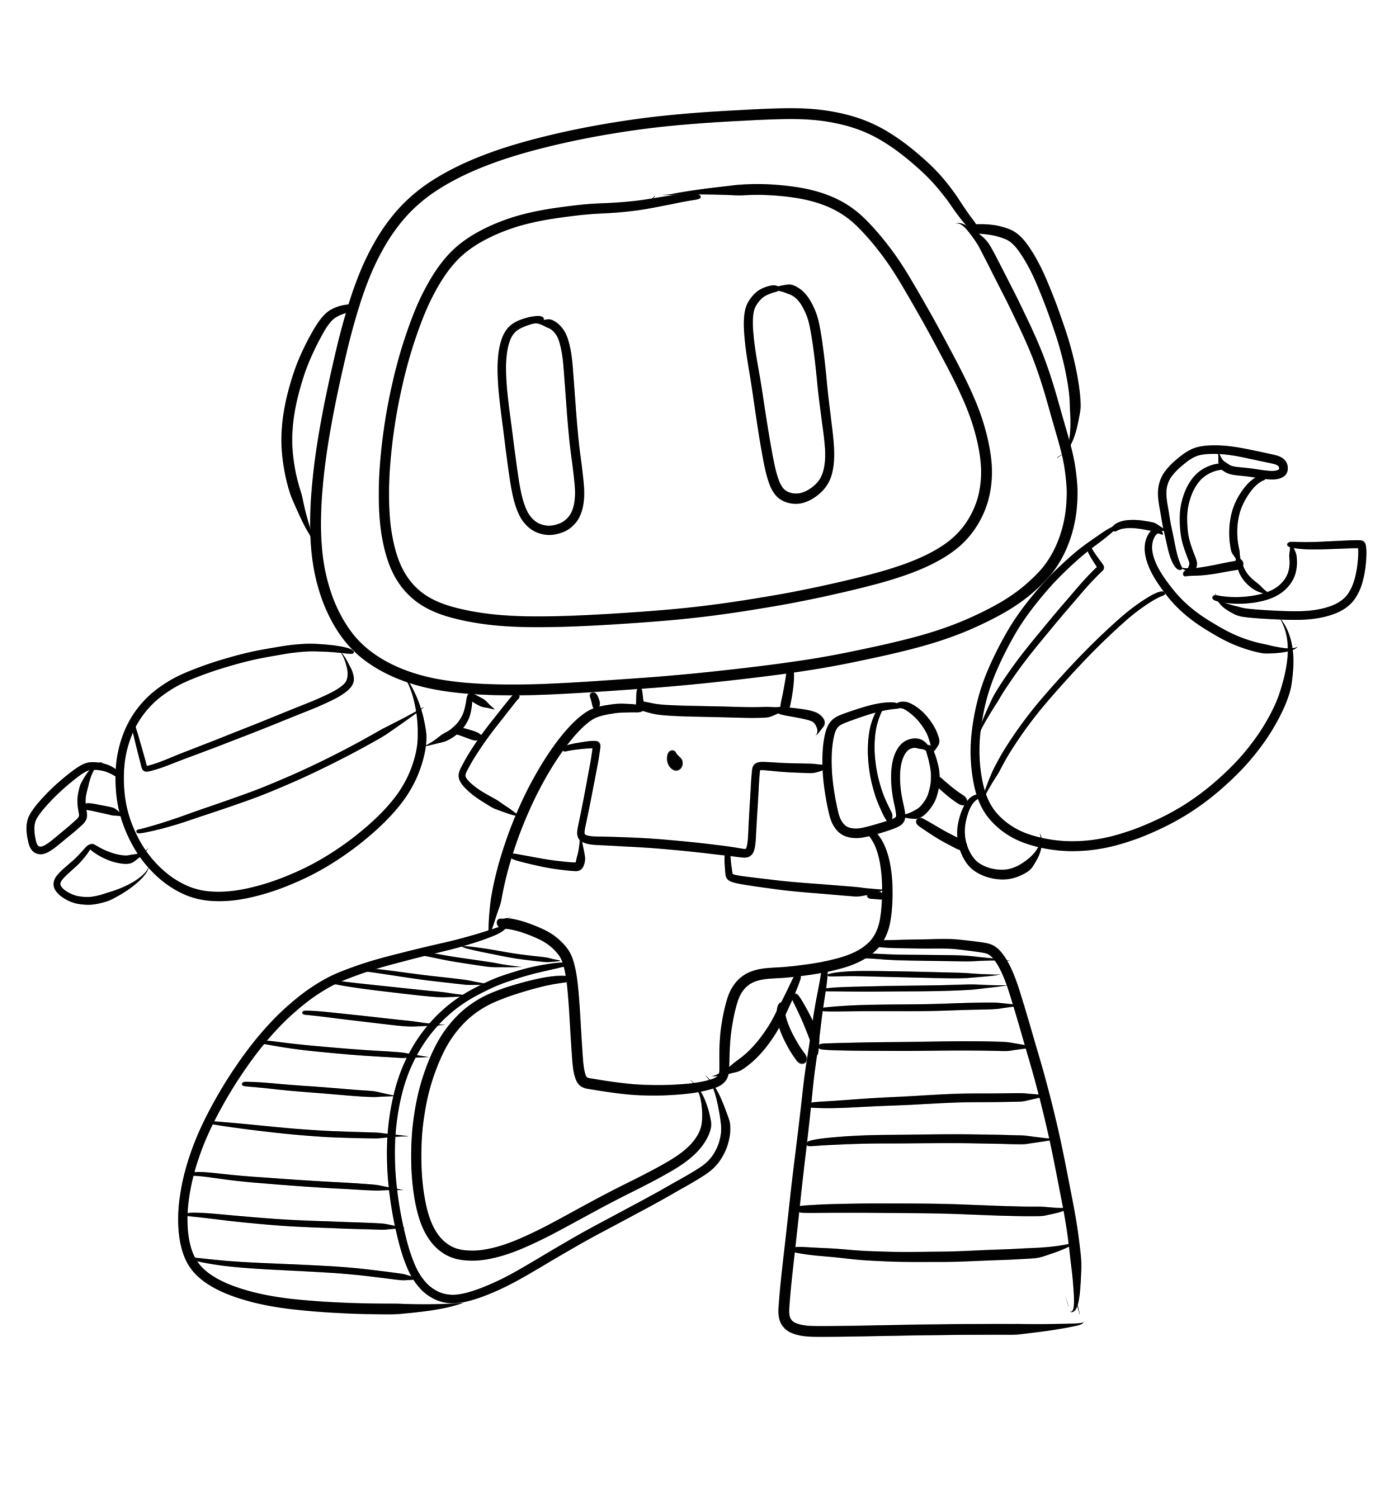 Boogie Bot from Poppy Playtime coloring page